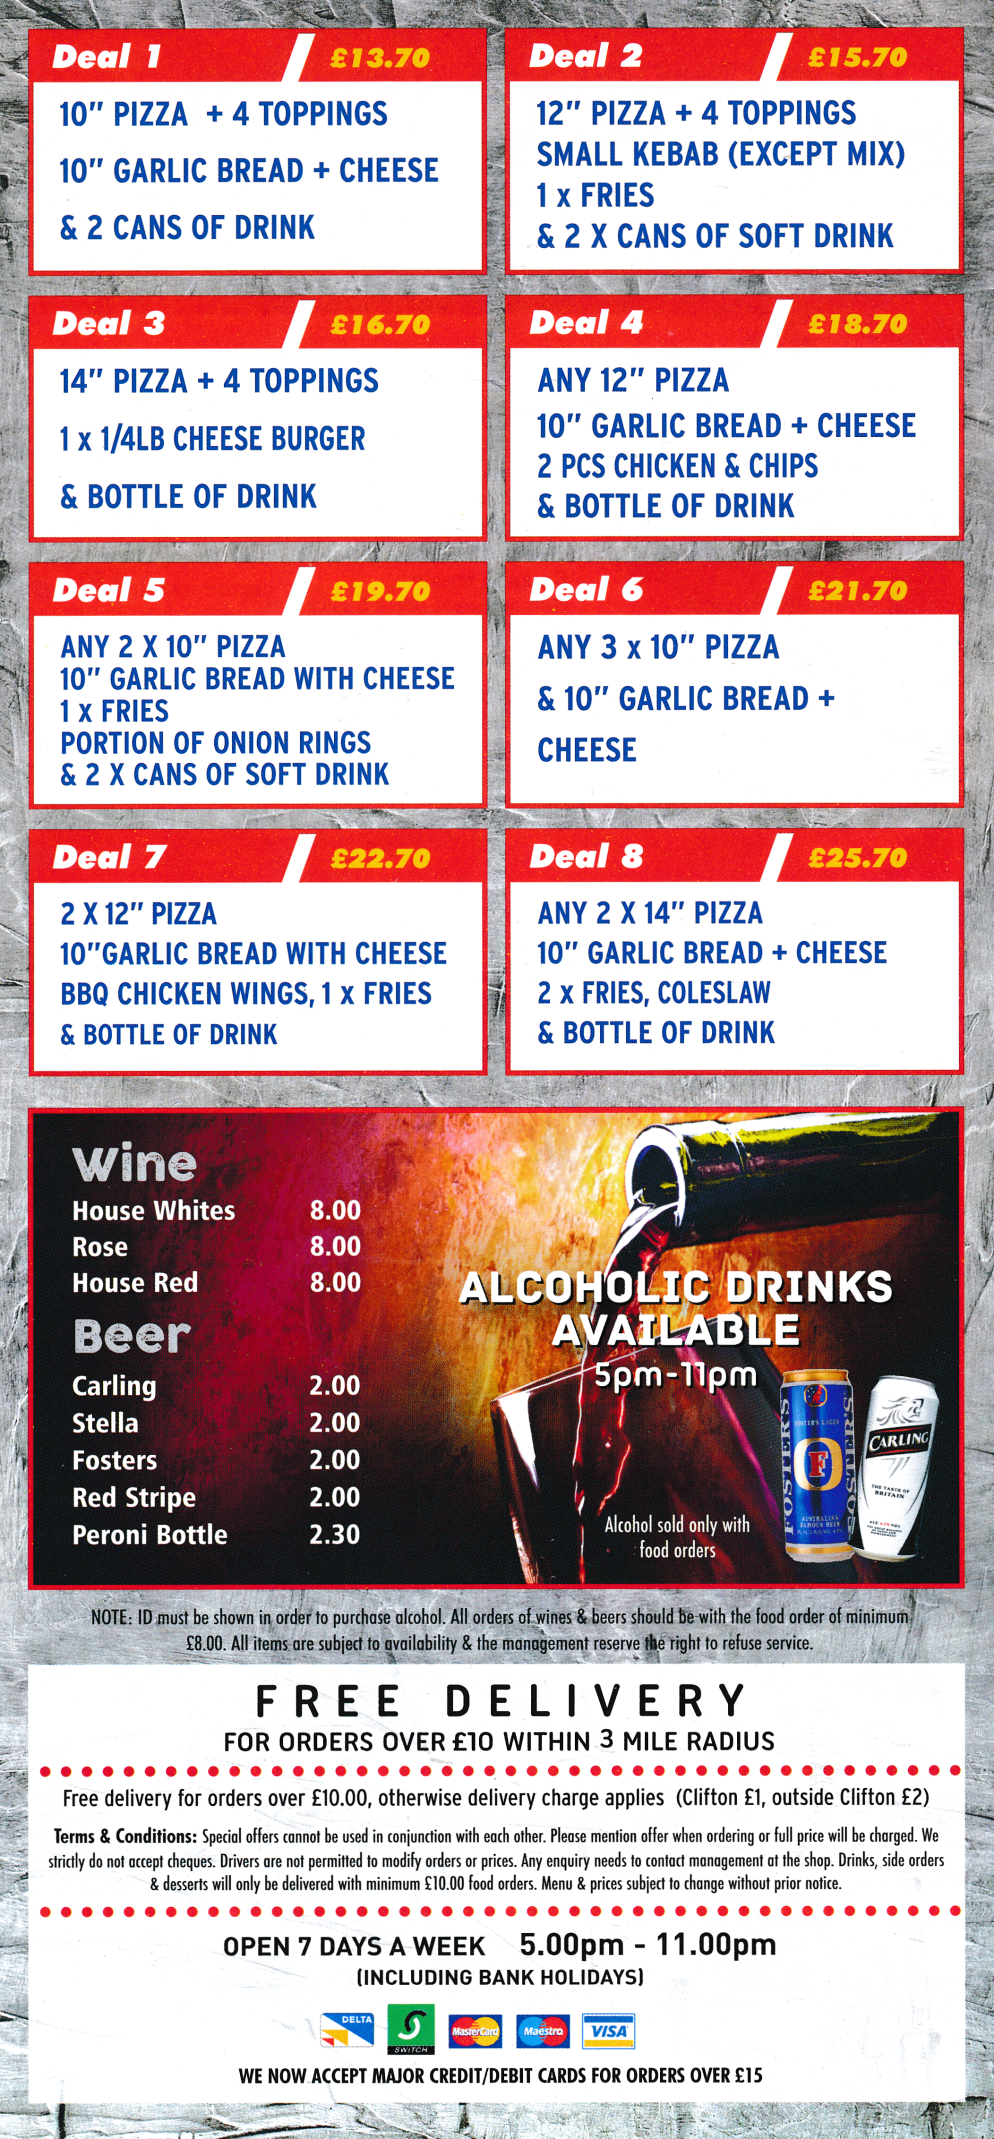 Menu for Pizza Pasta - Meal Deals, Wine & Beer - Order your favourite pizza, kebab or burger for delivery in Clifton tonight!